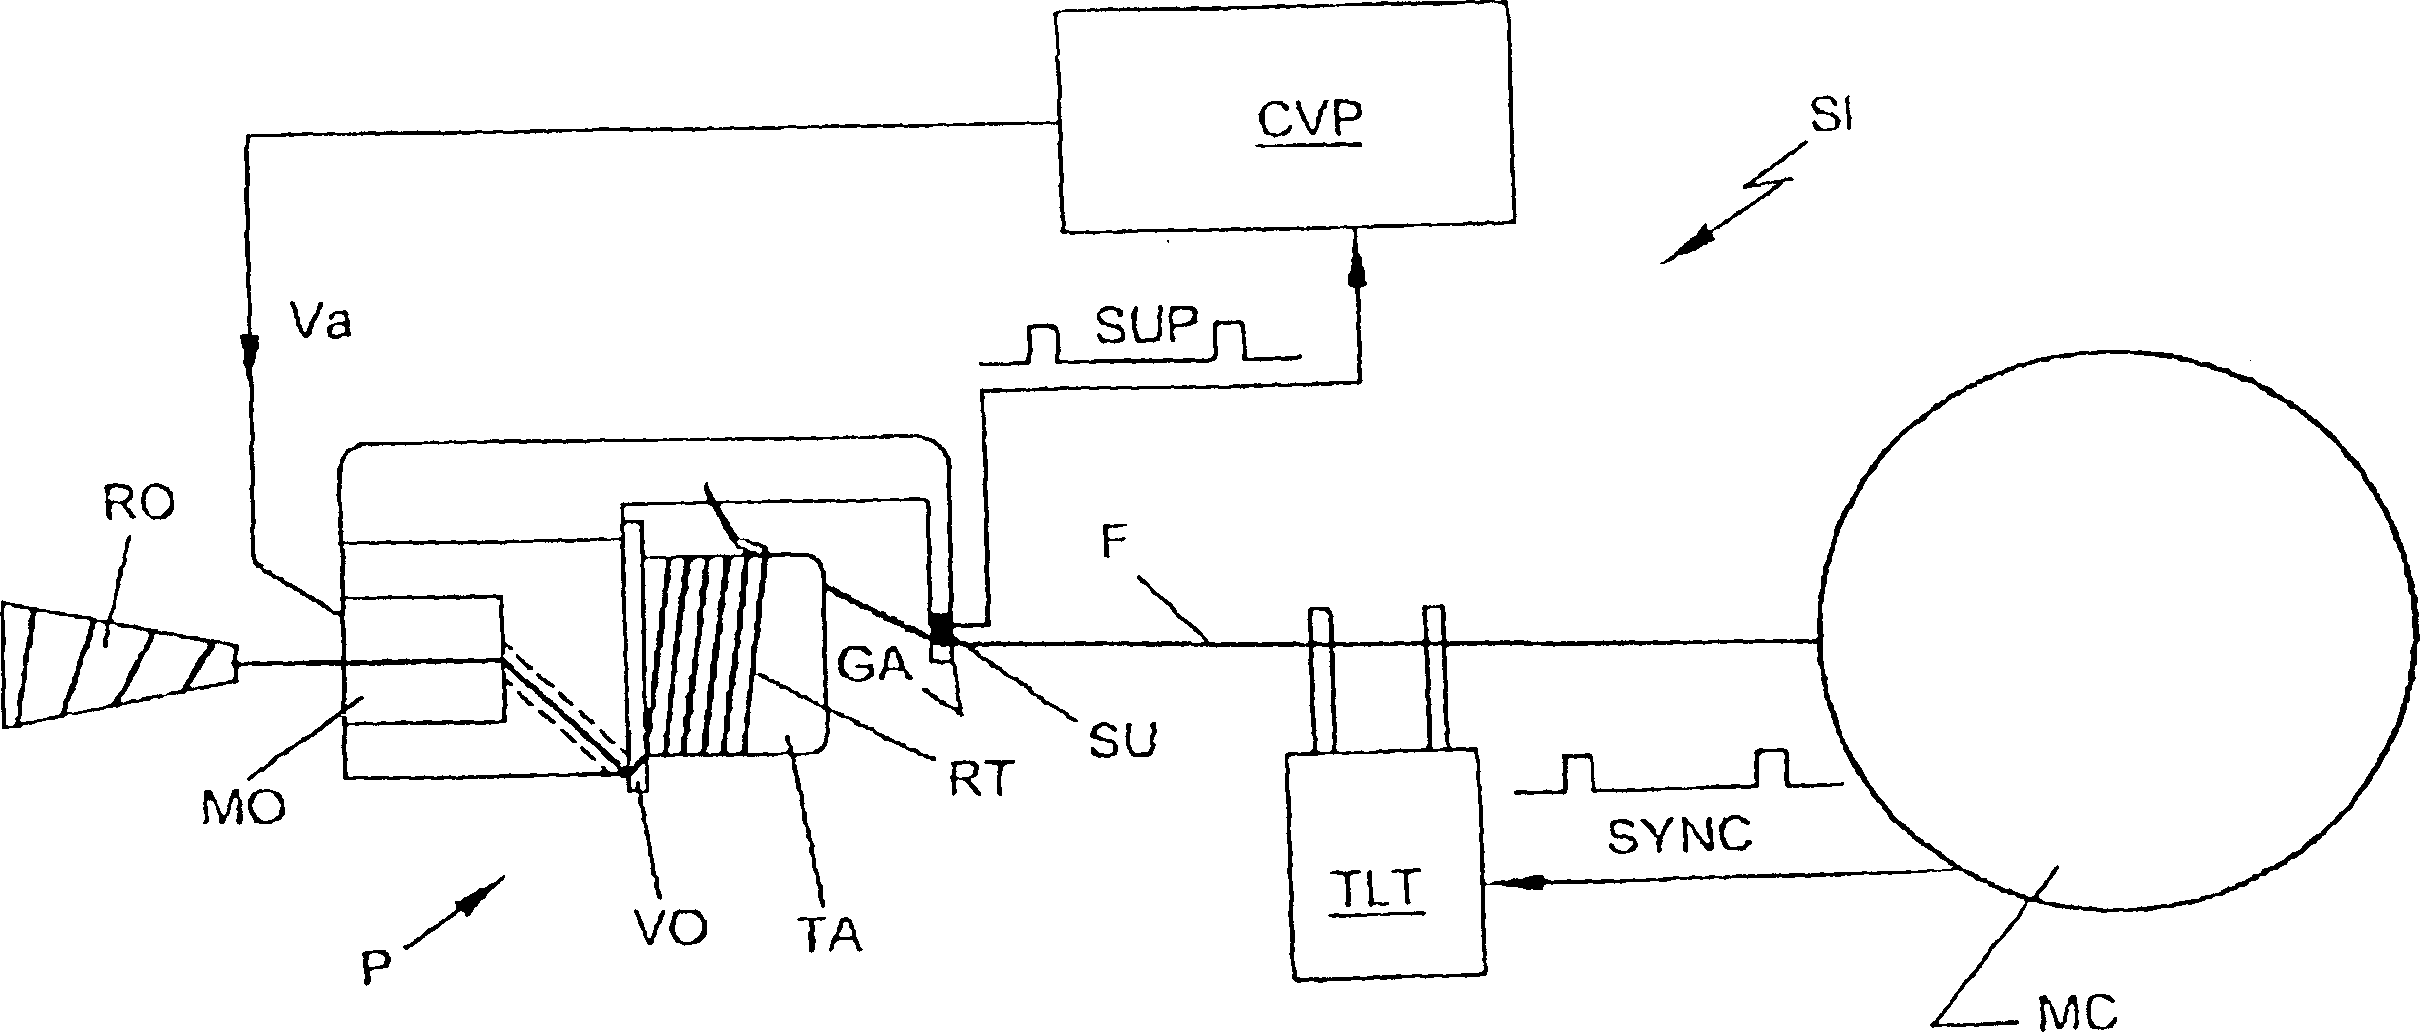 Method and apparatus specially adapted for measuring weft yarn in circular loom